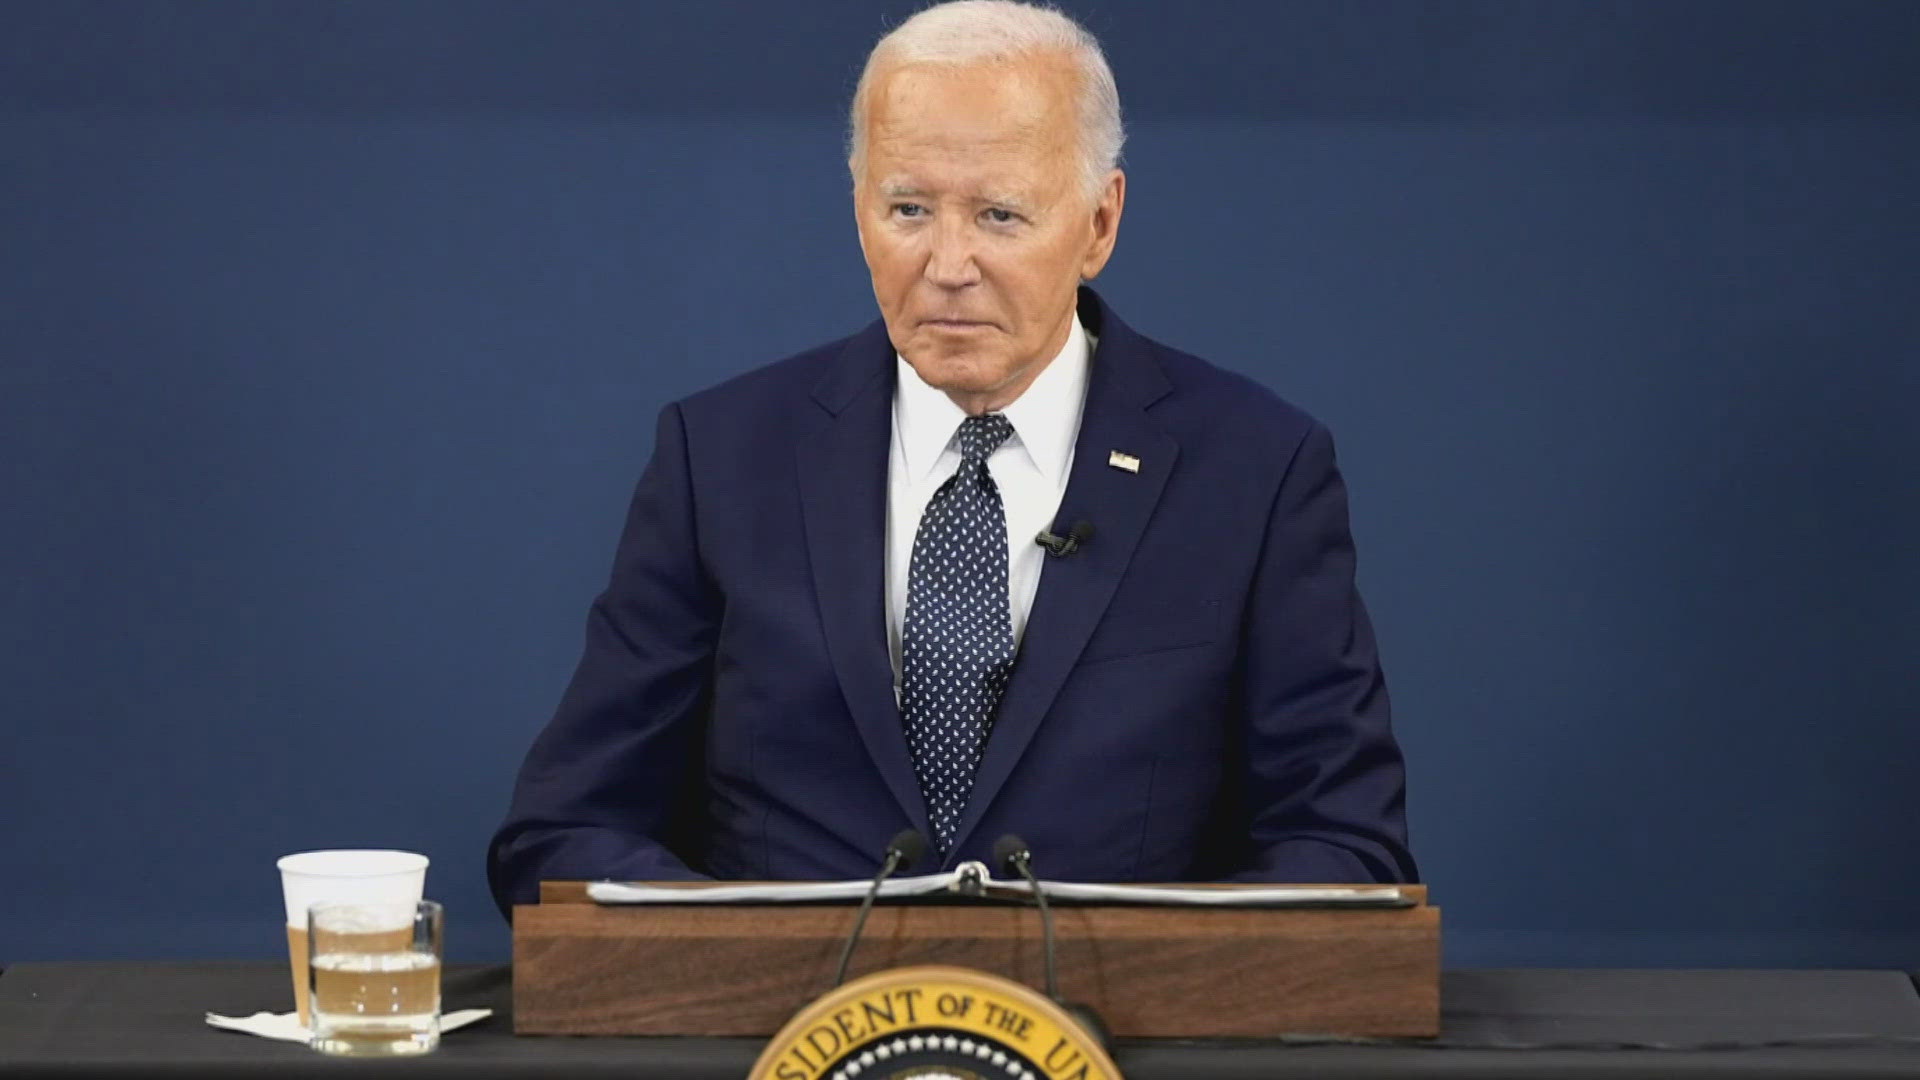 Biden will try to convince voters of his fitness for office and his ability to win re-election with two events tomorrow.